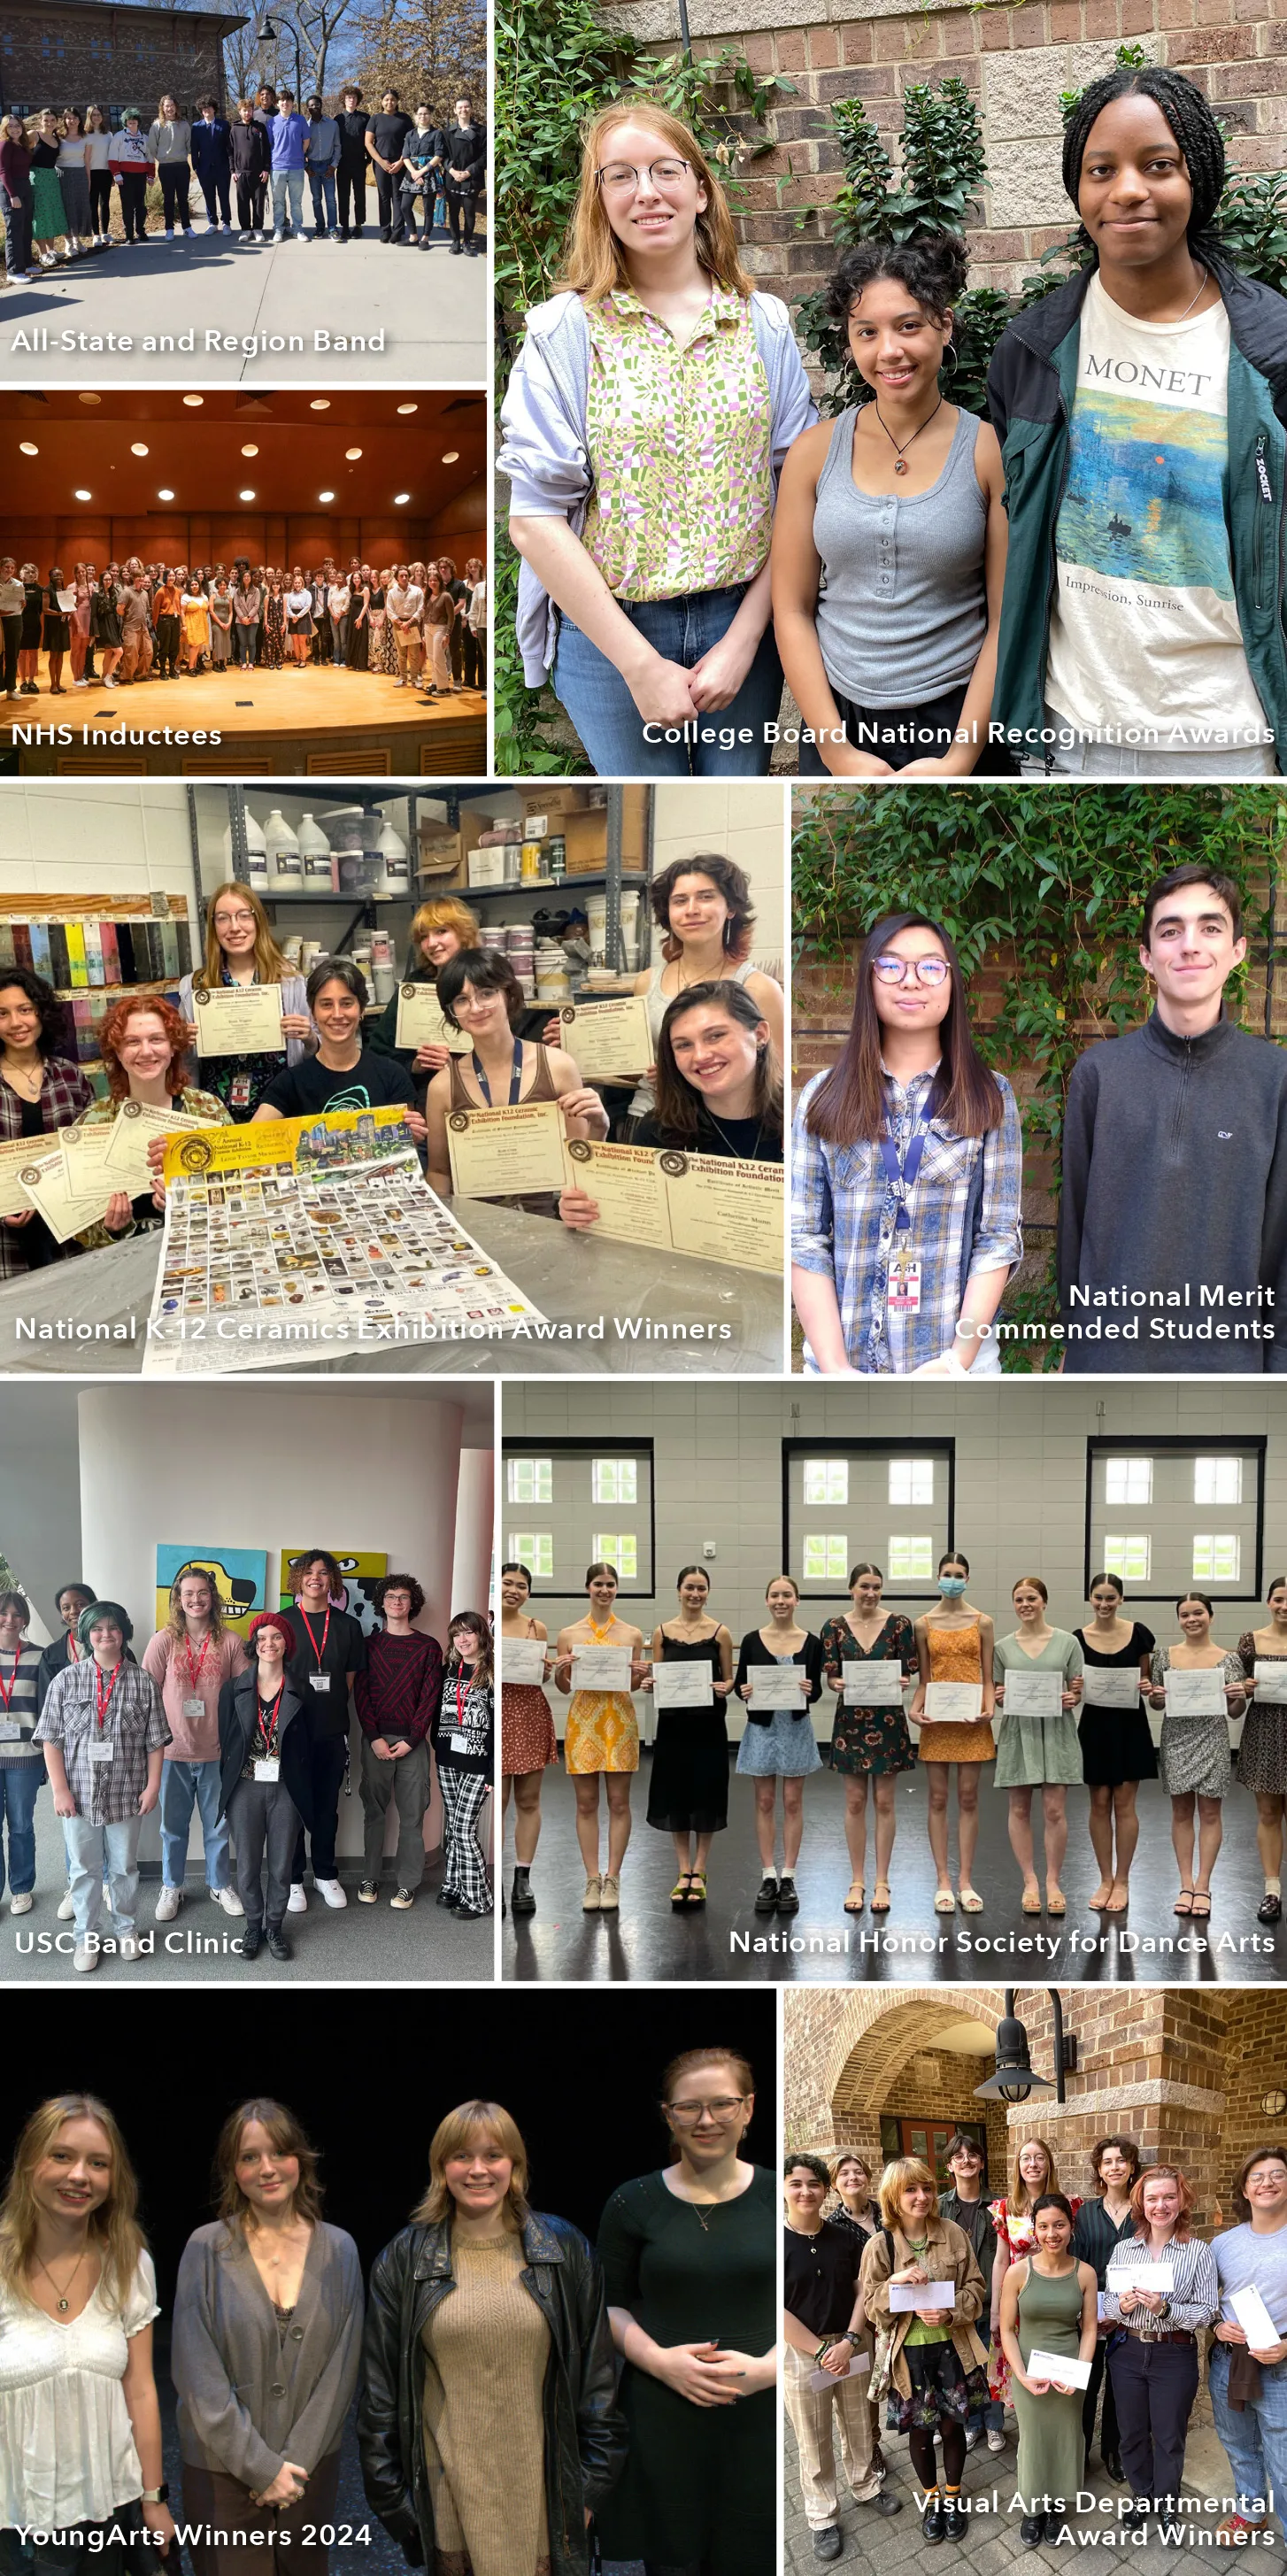 Photos of students with awards